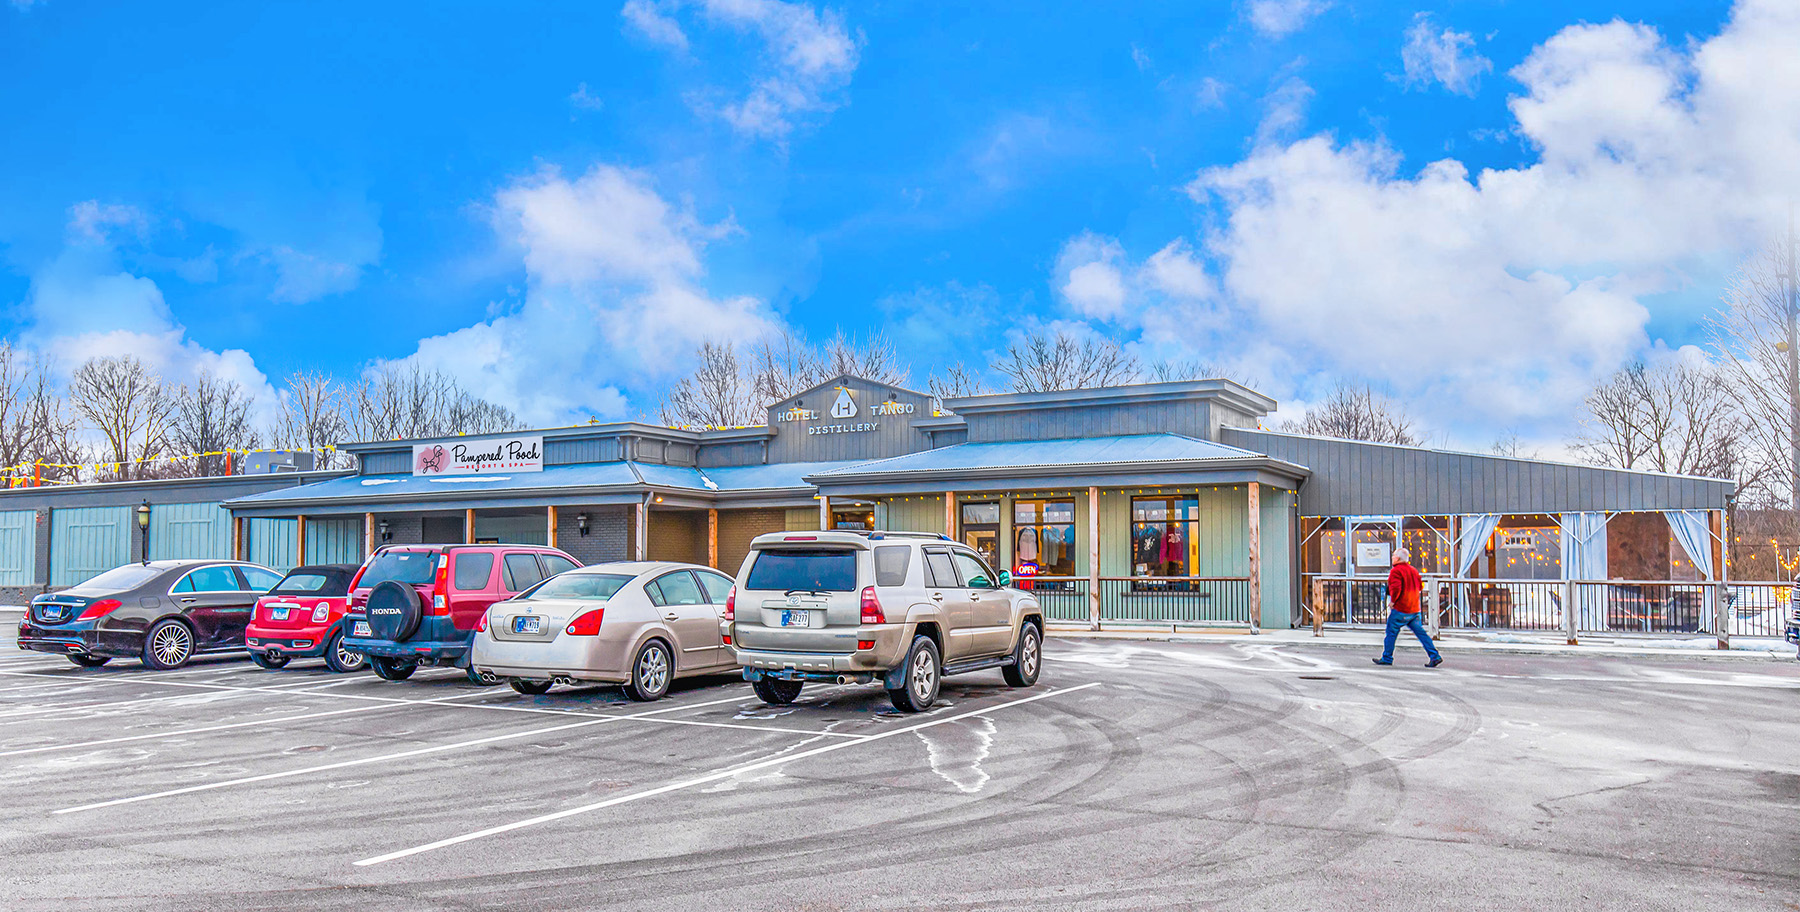 Hanley Investment Group Arranges Sale of 11,400 SF Retail Center in Affluent Indianapolis Suburb for $3,145,000 